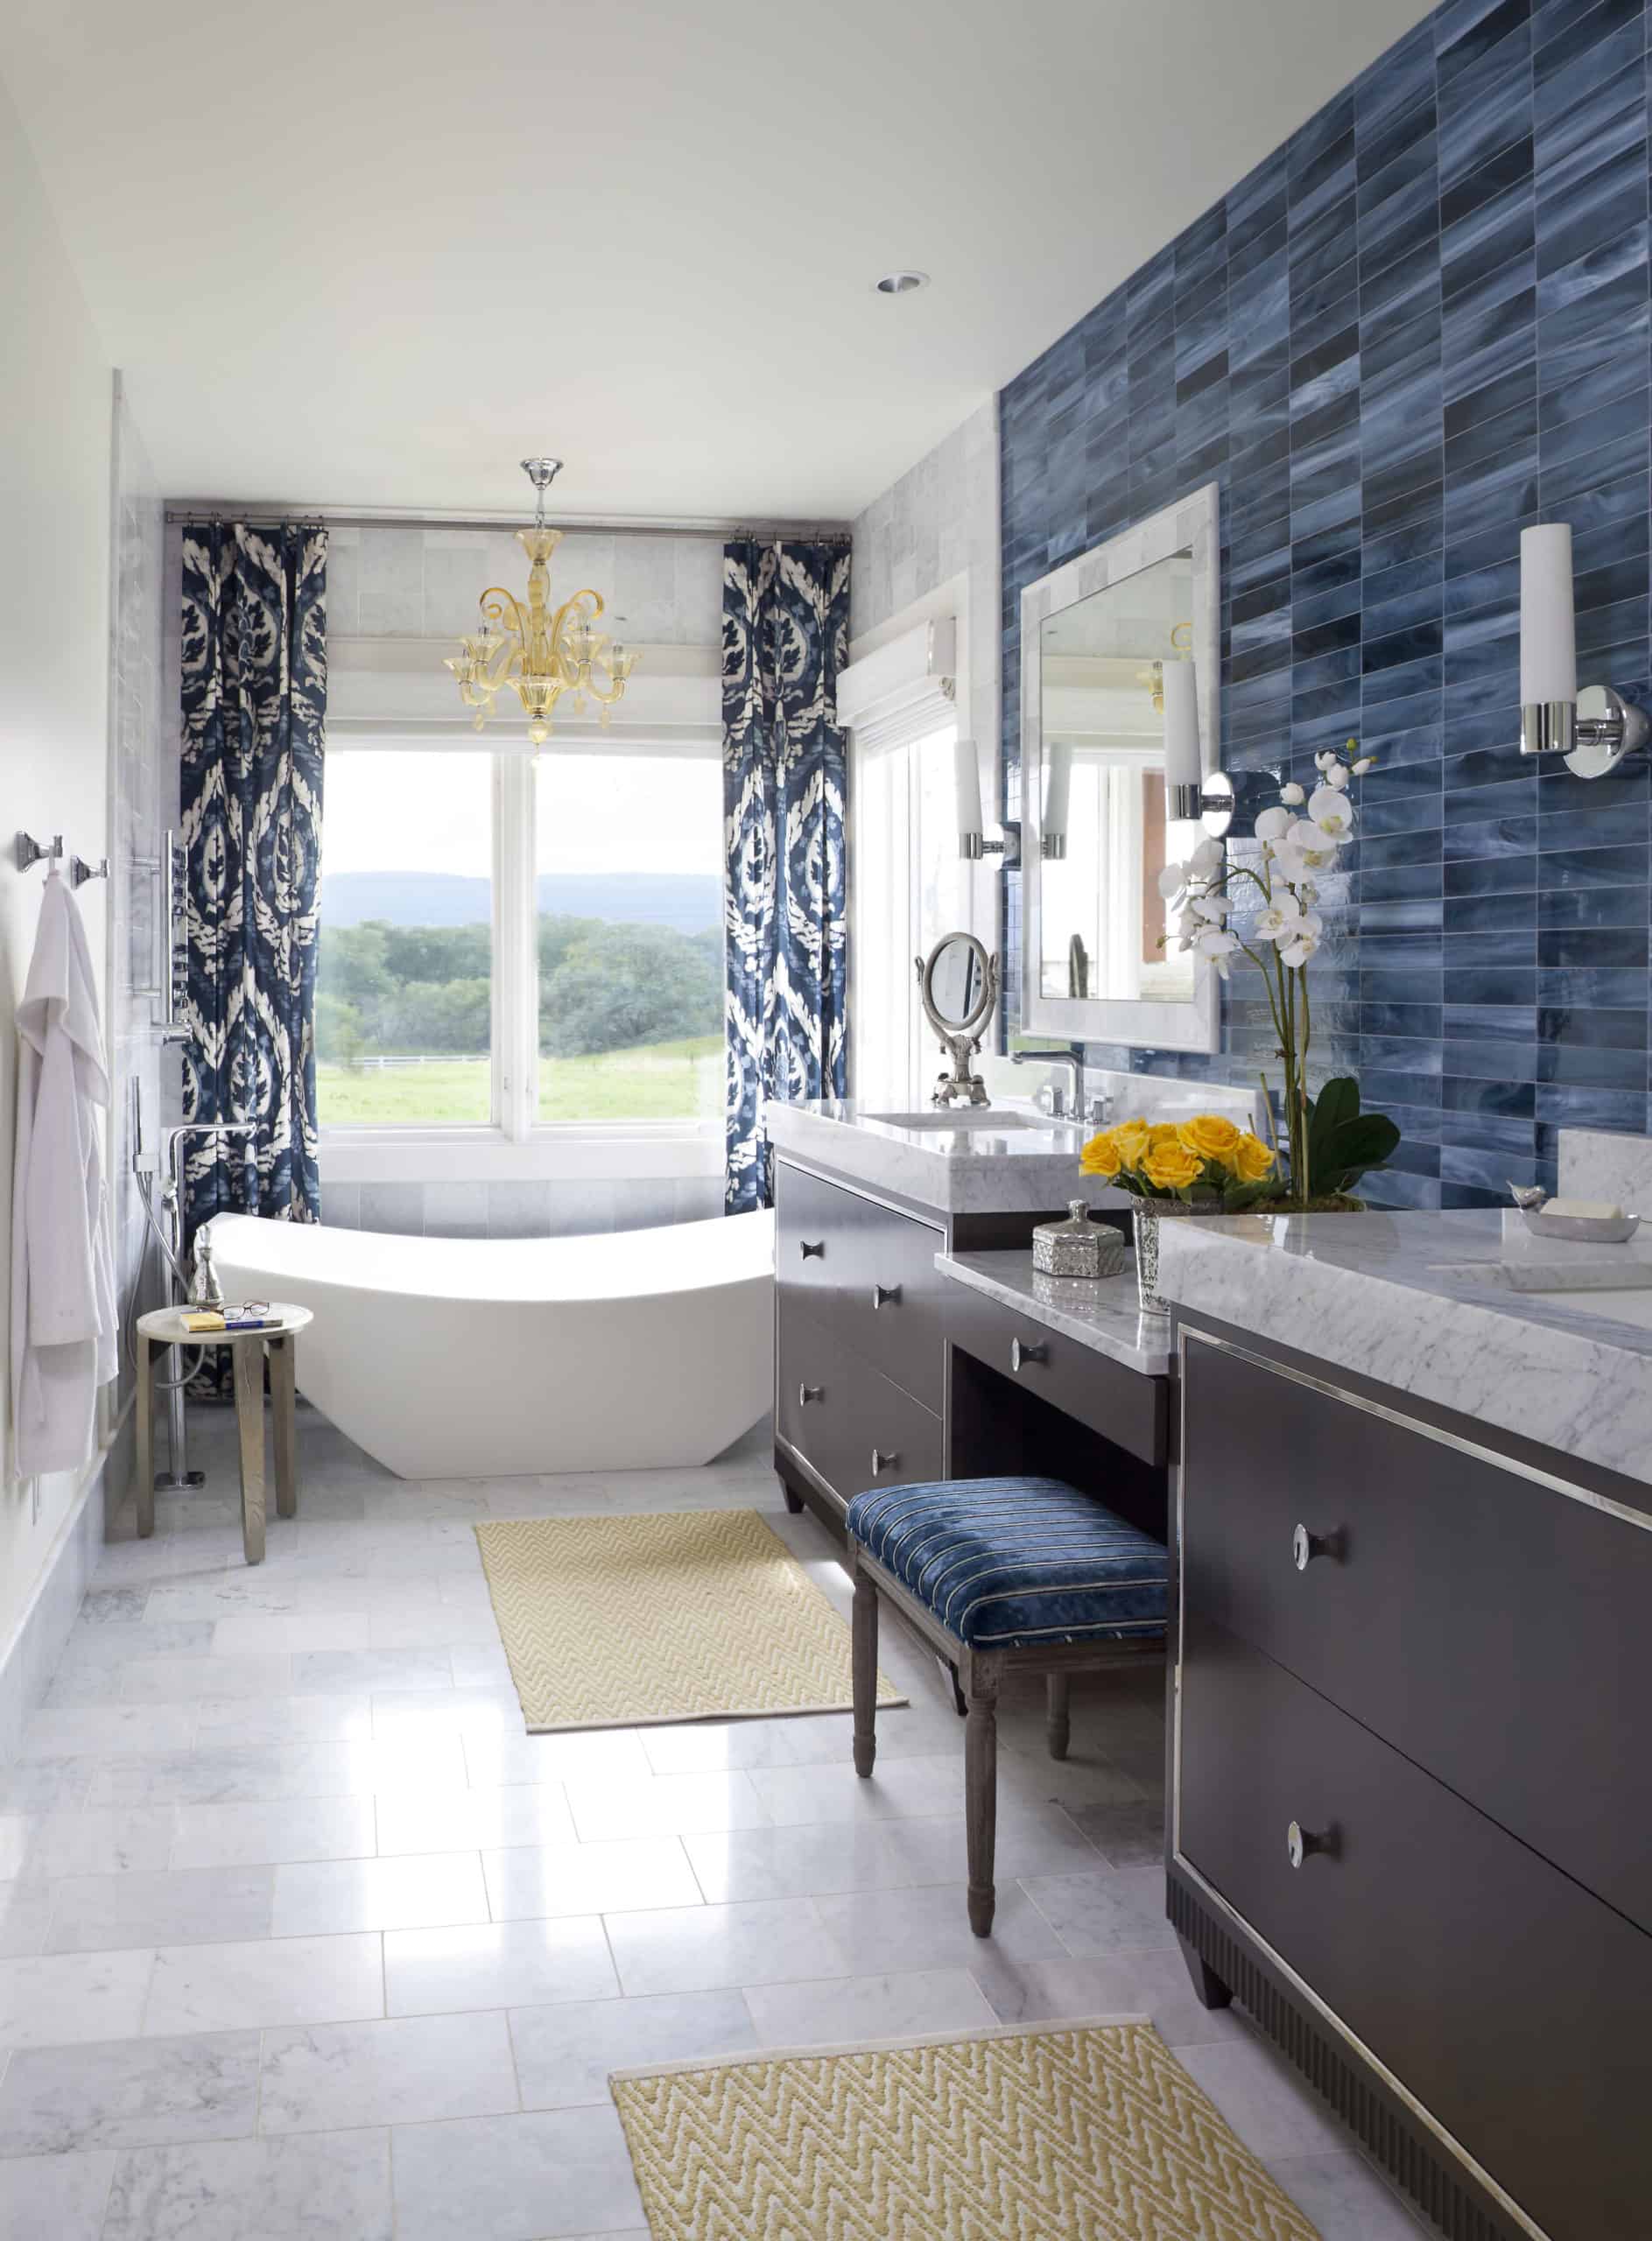 Blue tiled bathroom, freestanding tub, double vanities, beautiful blue and white draperies in master bath